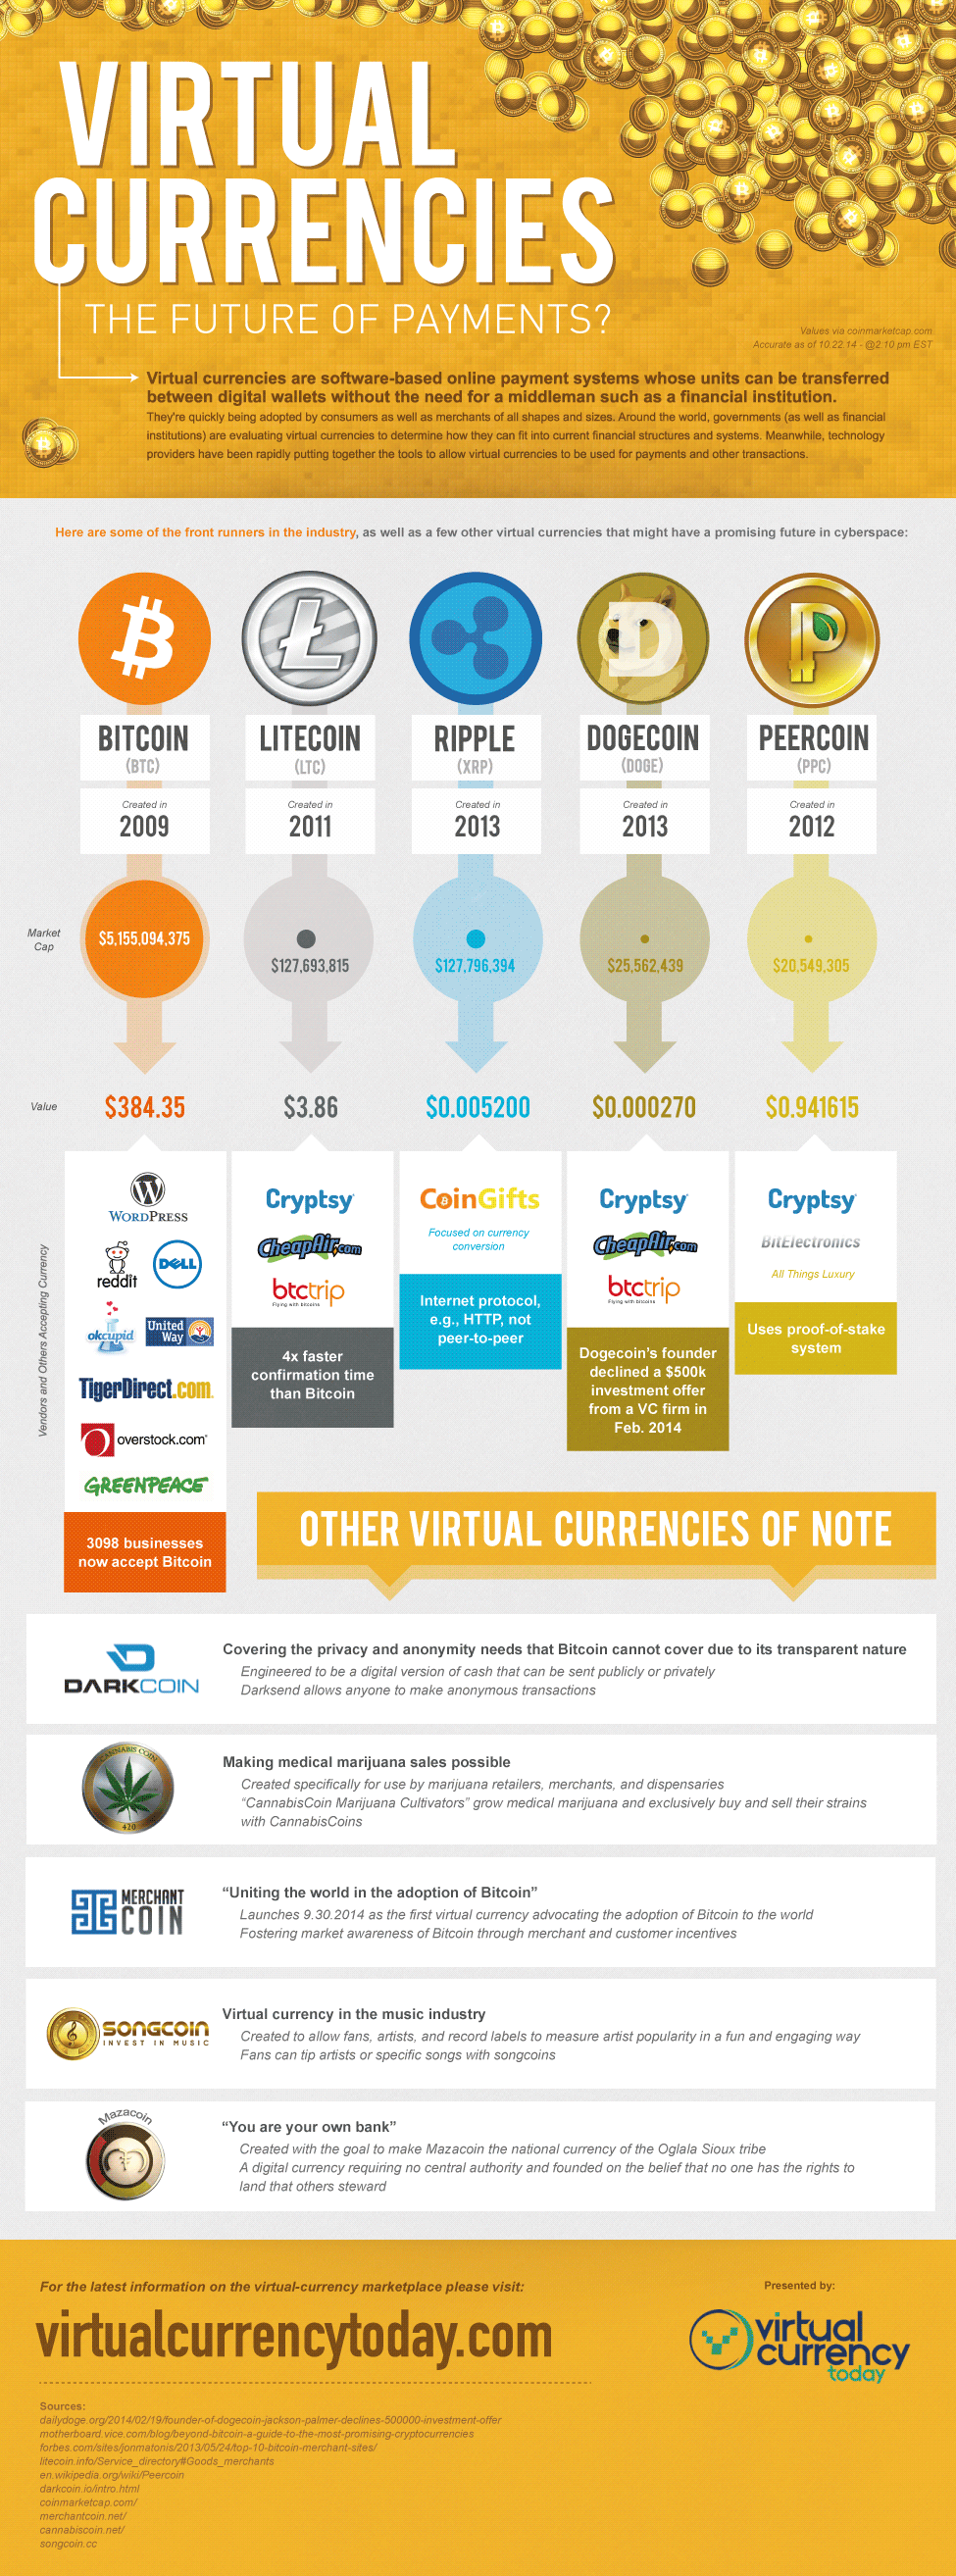 Virtual-Currencies-The-Future-of-Payments